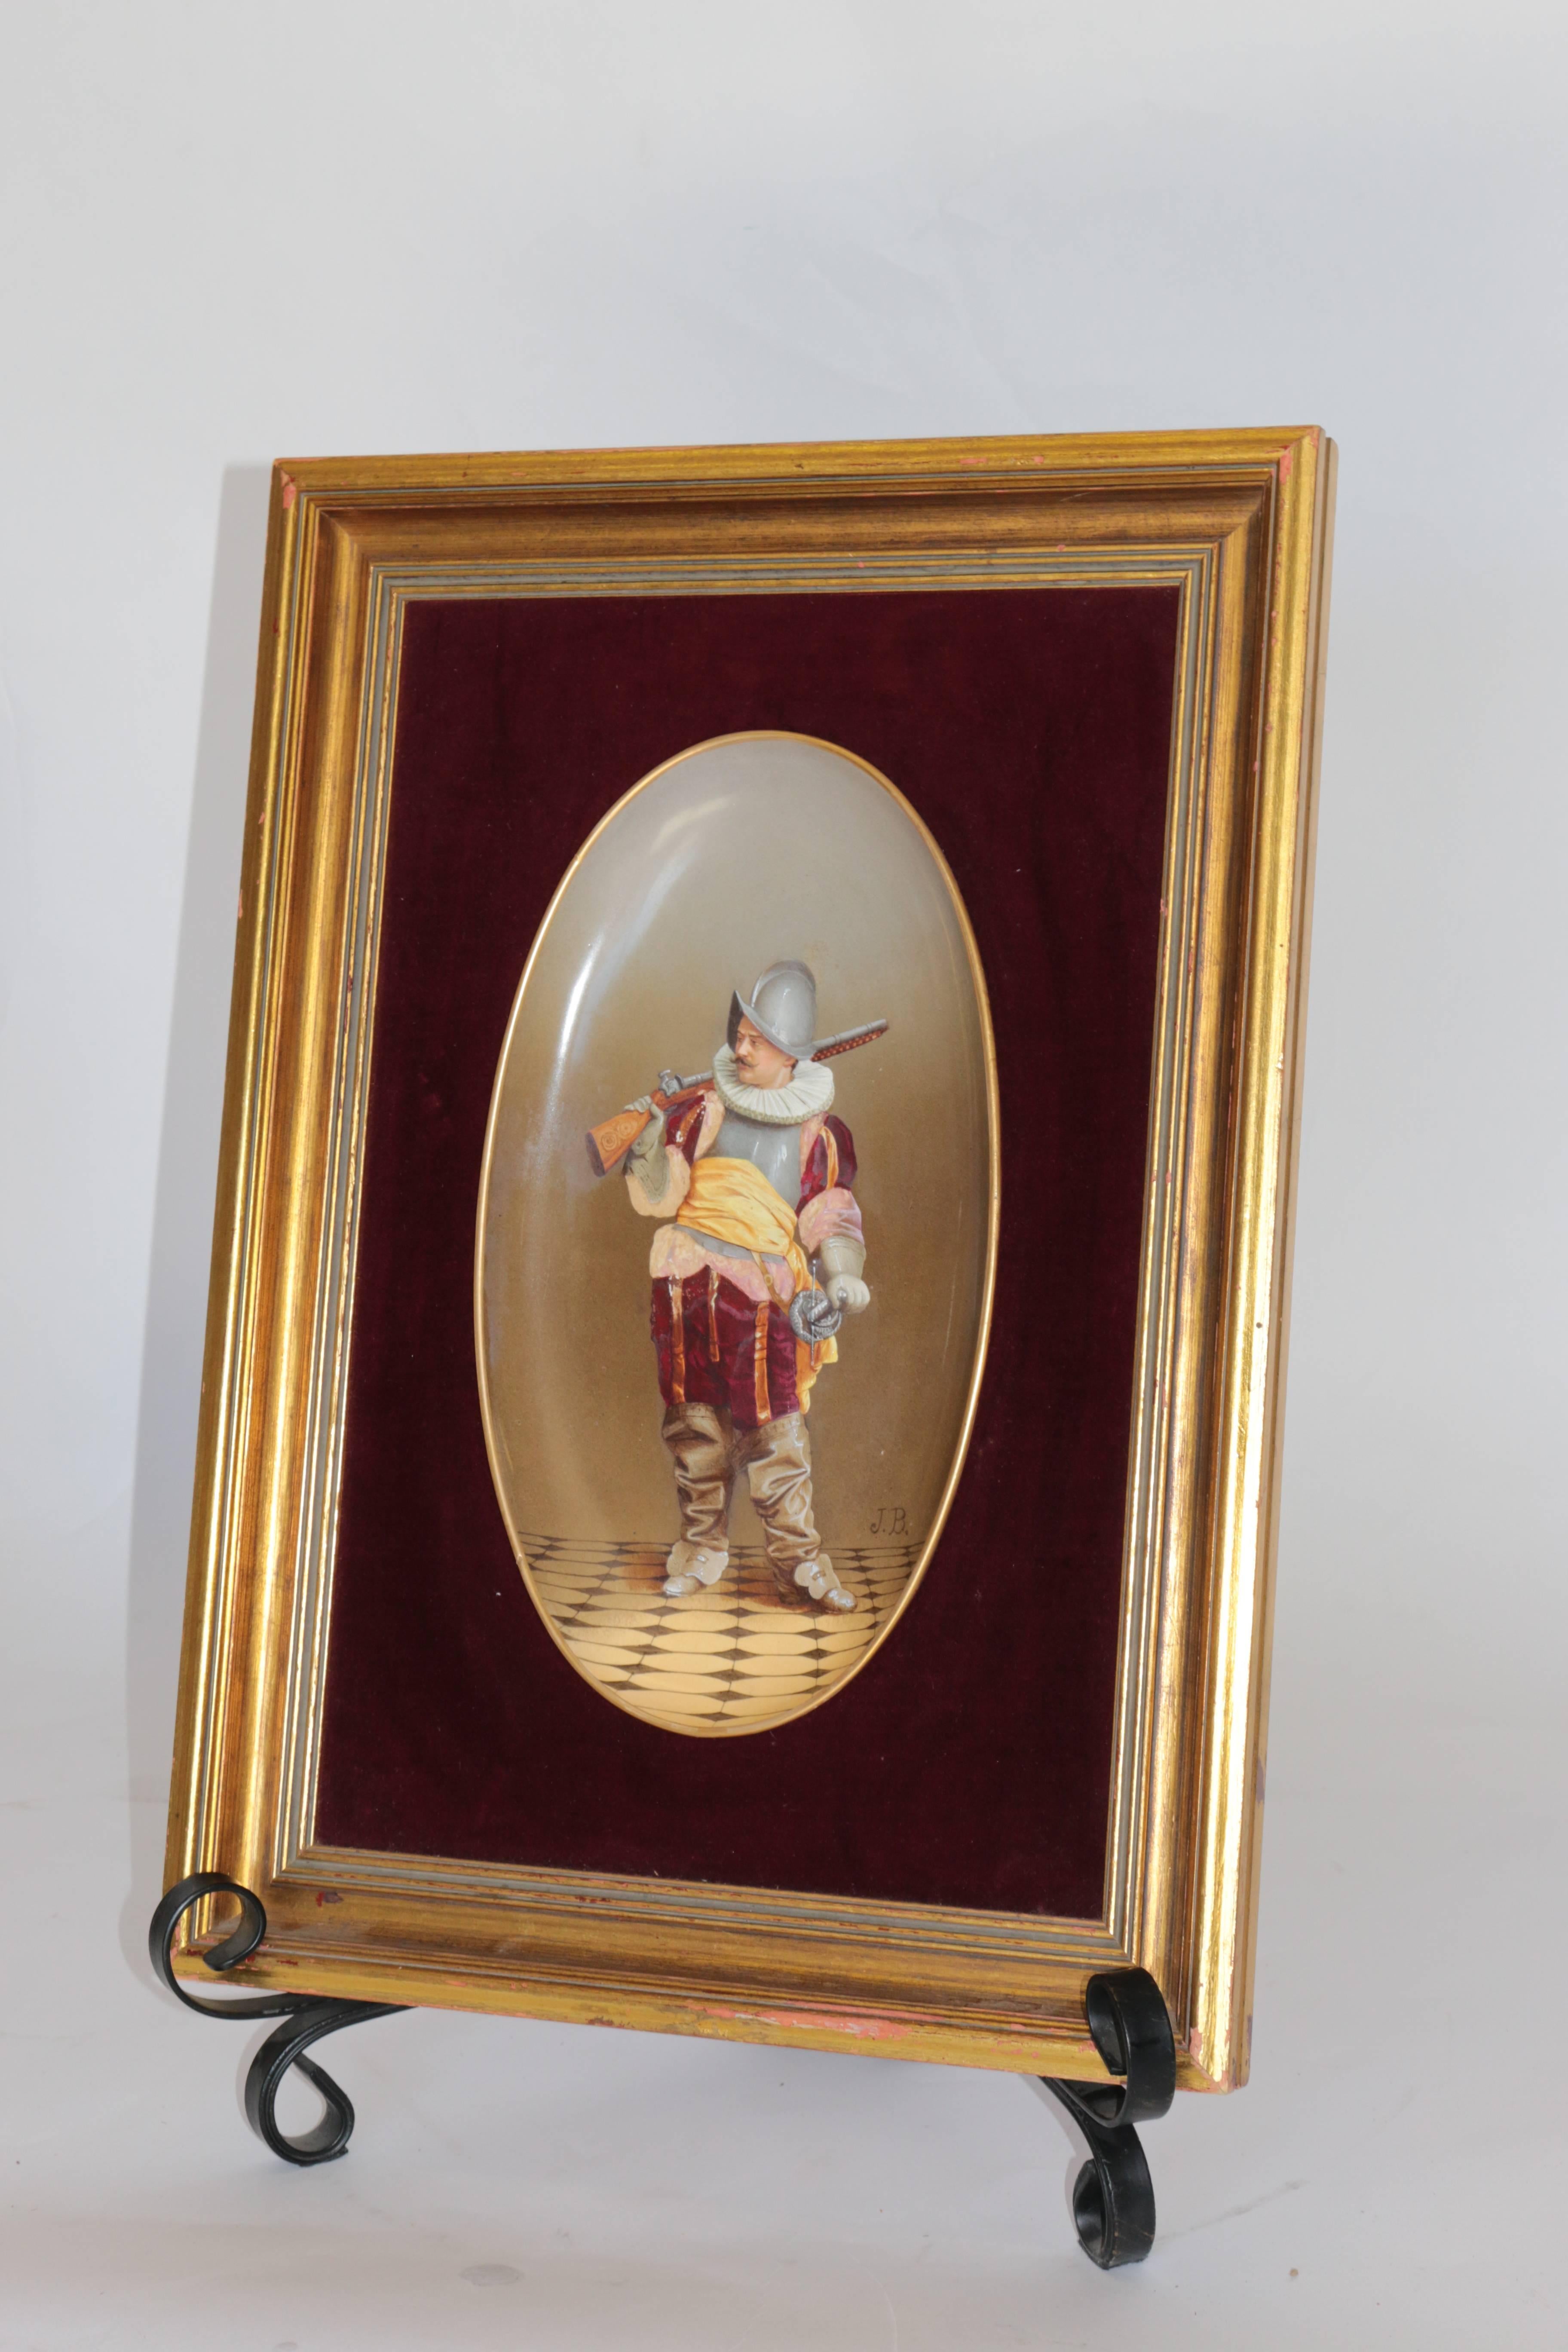 19tth century French hand-painted porcelain plaque with custom frame and velvet backing. This beautiful porcelain is accentuated by the velvet backing and the custom frame. 

The porcelain plaque is removable.